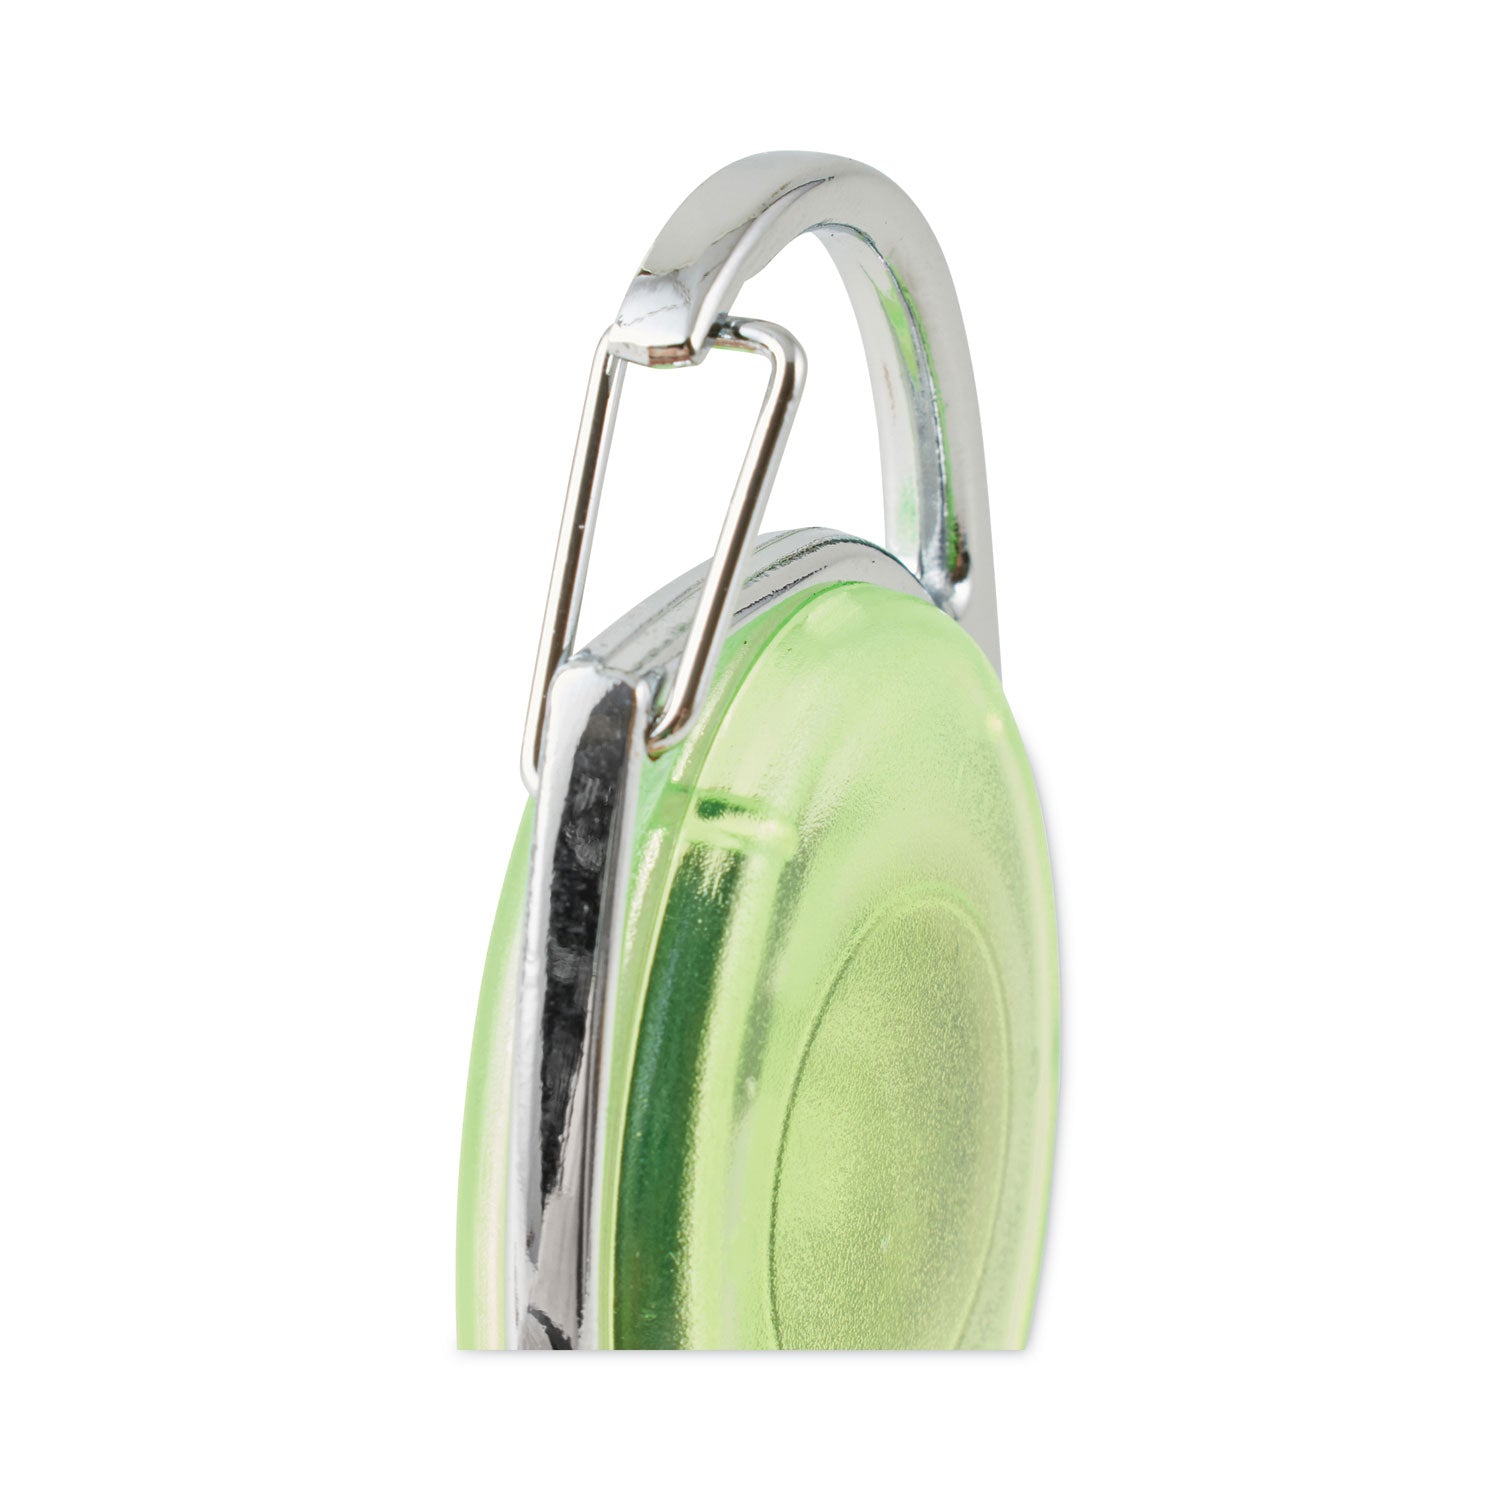 carabiner-style-retractable-id-card-reel-30-extension-assorted-neon-colors-20-pack_avt91119 - 5